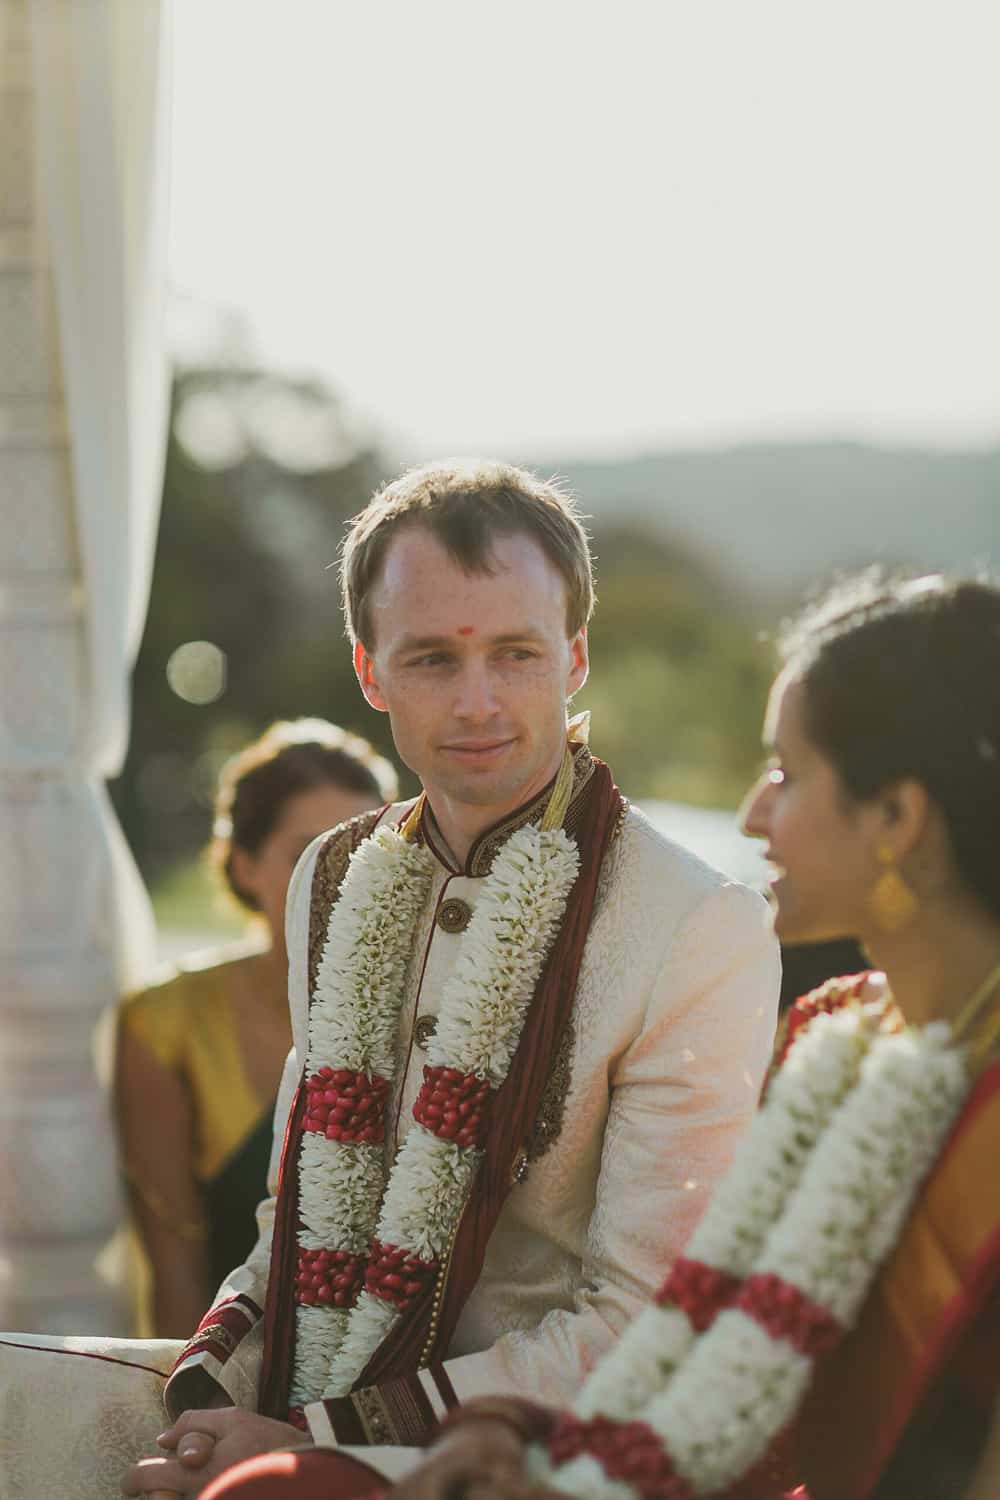 2015's best gressed grooms / traditional Indian wedding attire